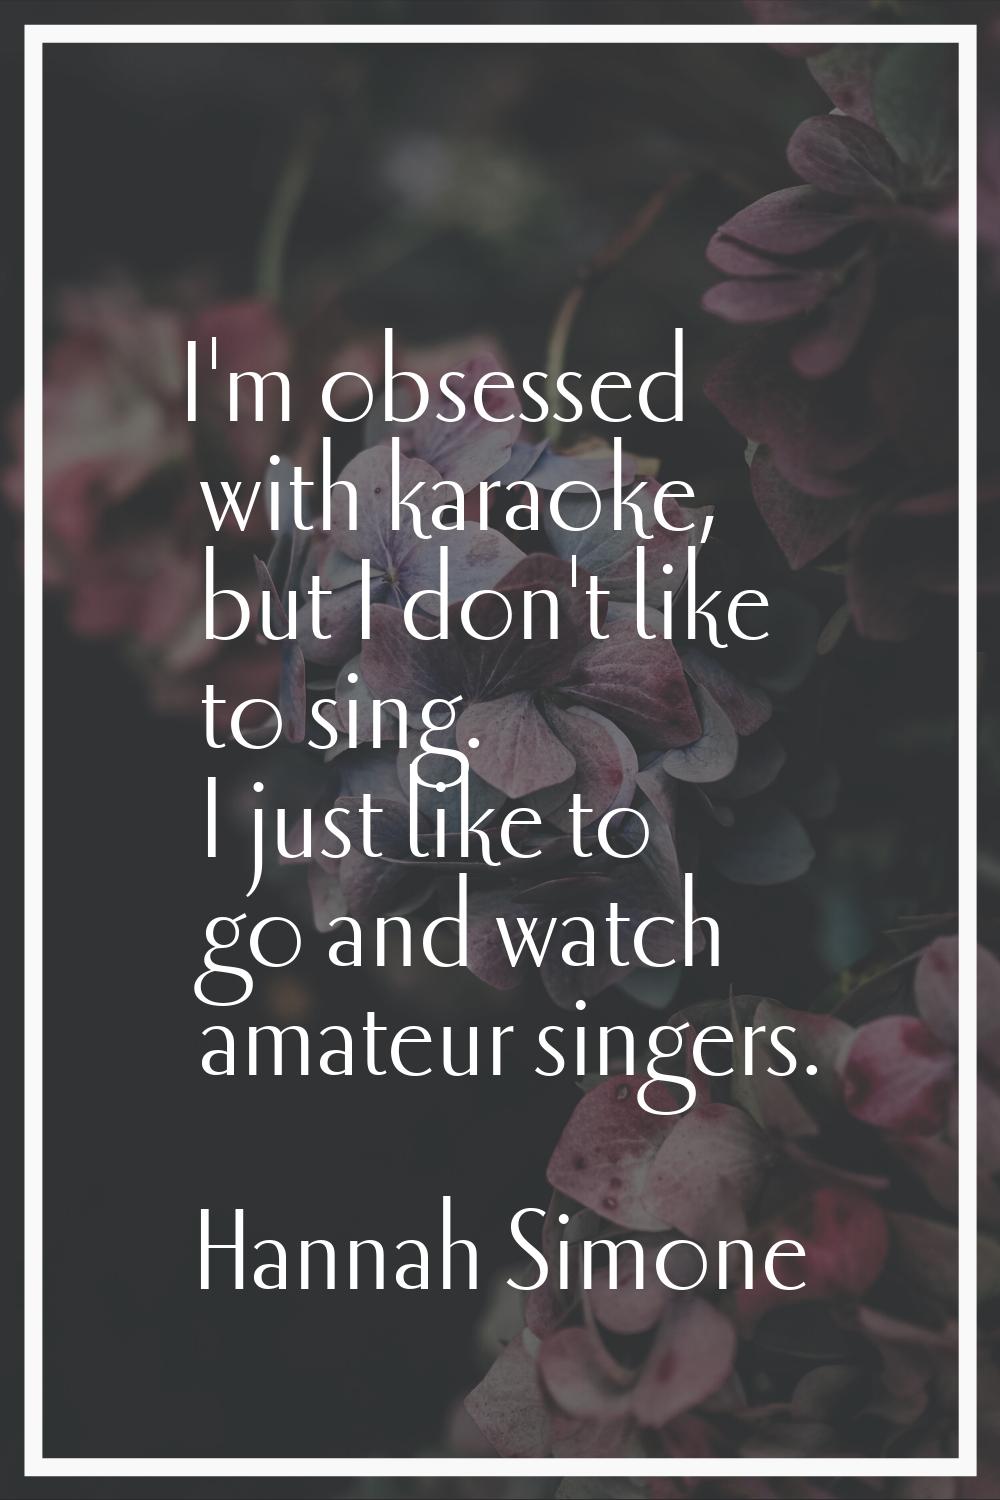 I'm obsessed with karaoke, but I don't like to sing. I just like to go and watch amateur singers.